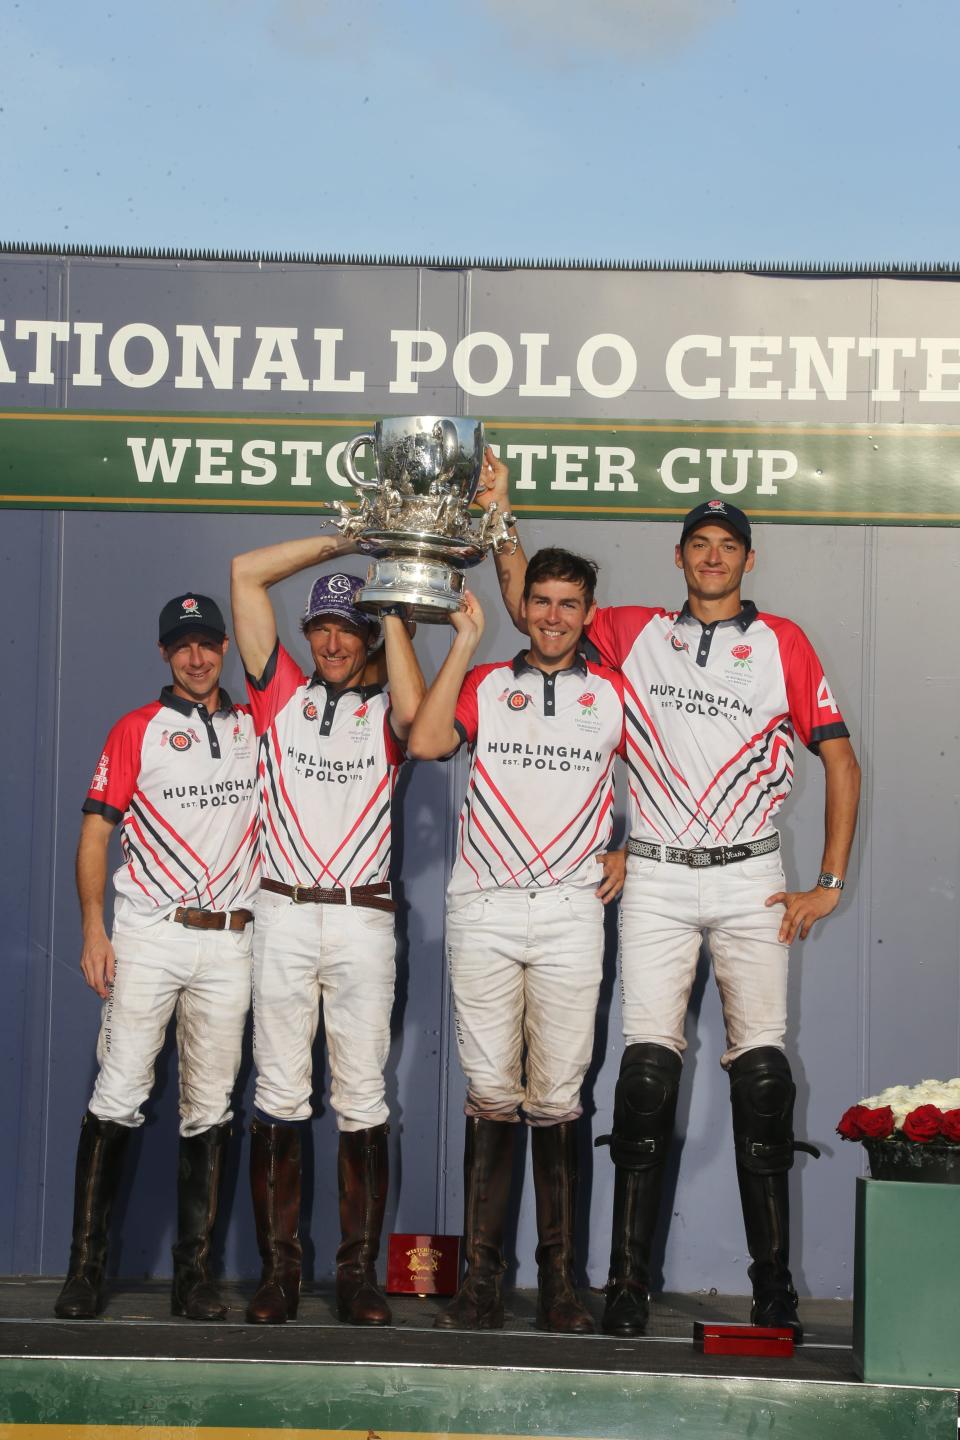 England's polo team celebrates defeating the U.S. while holding up the Westchester Cup Friday at National Polo Center.